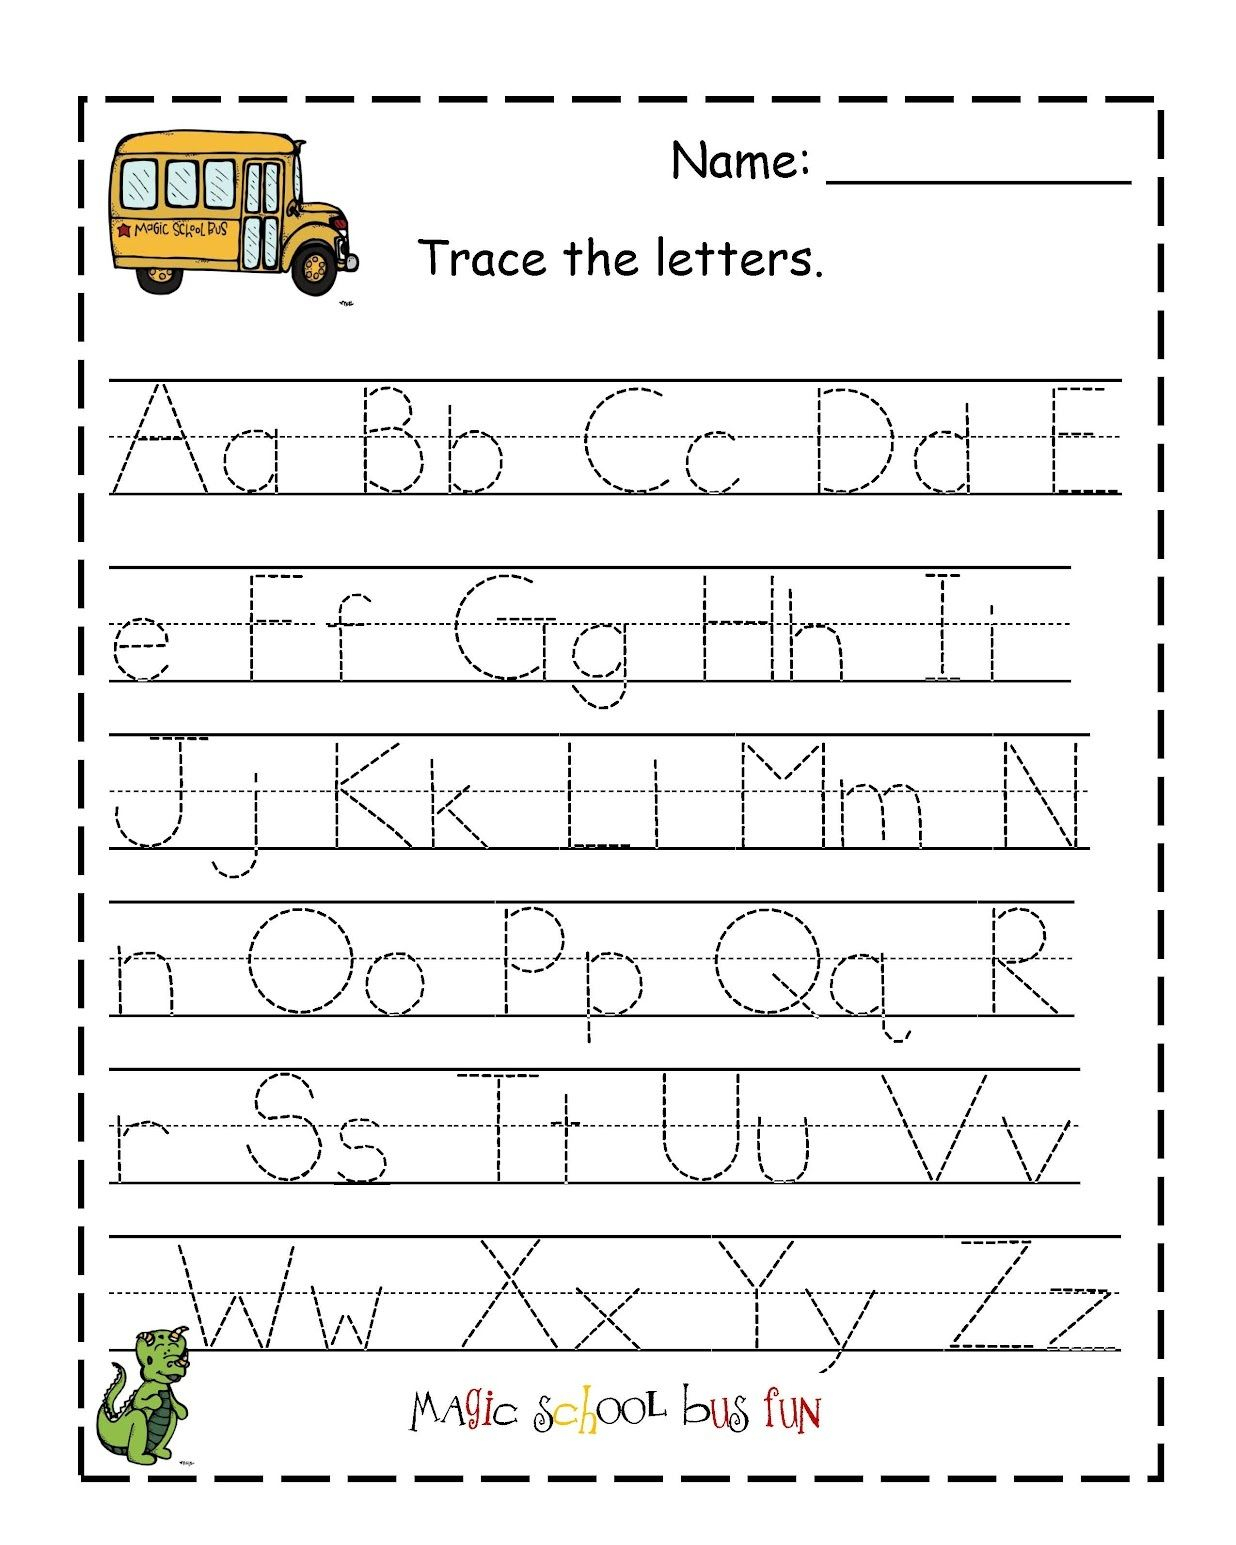 Traceable Letter Worksheets To Print | Arbeitsblätter Zum in Tracing Letters Worksheets To Print